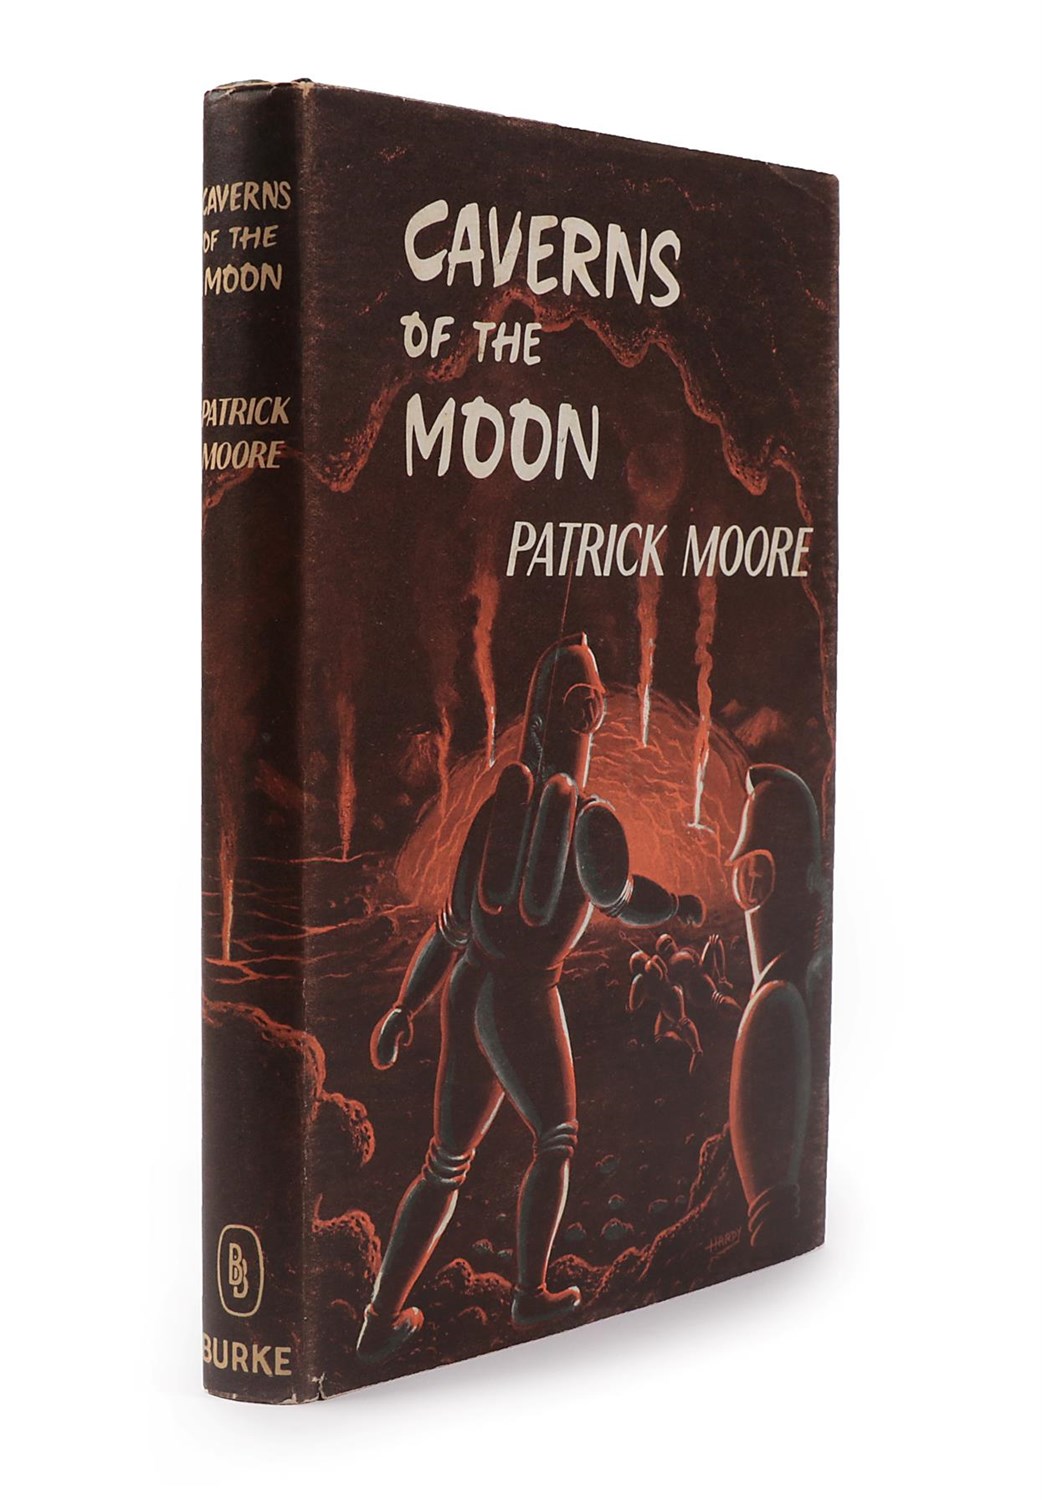 Lot 3060 - Moore (Patrick) Caverns of the Moon, Burke, 1964, first edition, dust wrapper (priced 10s 6d)